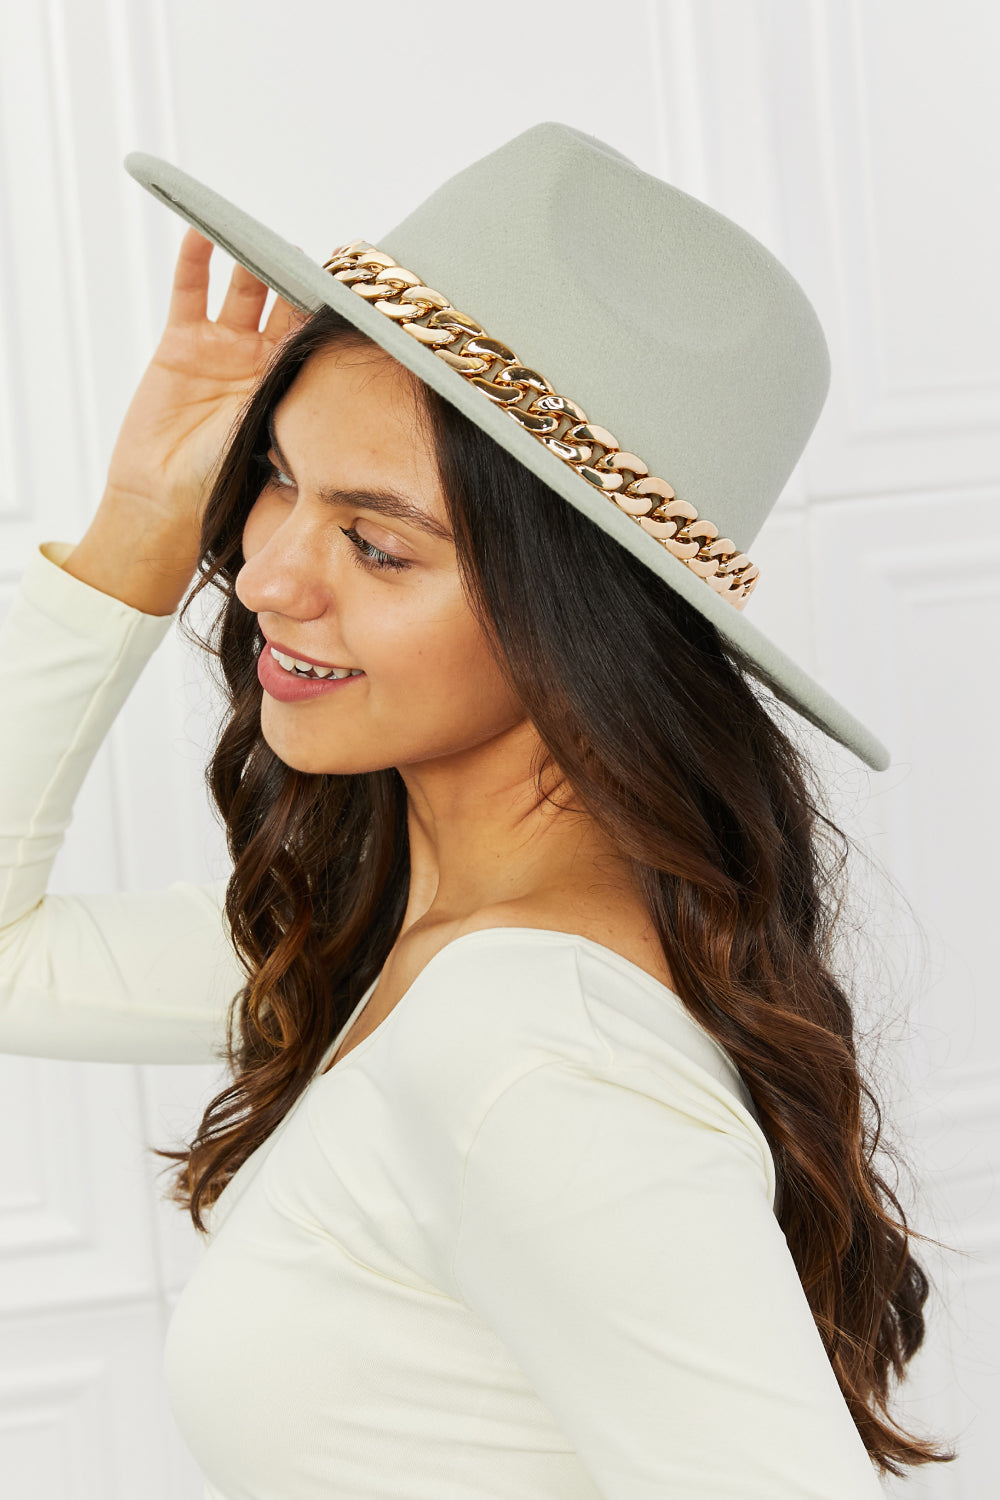 Fame Keep Your Promise Fedora Hat in Mint - Shop women apparel, Jewelry, bath & beauty products online - Arwen's Boutique